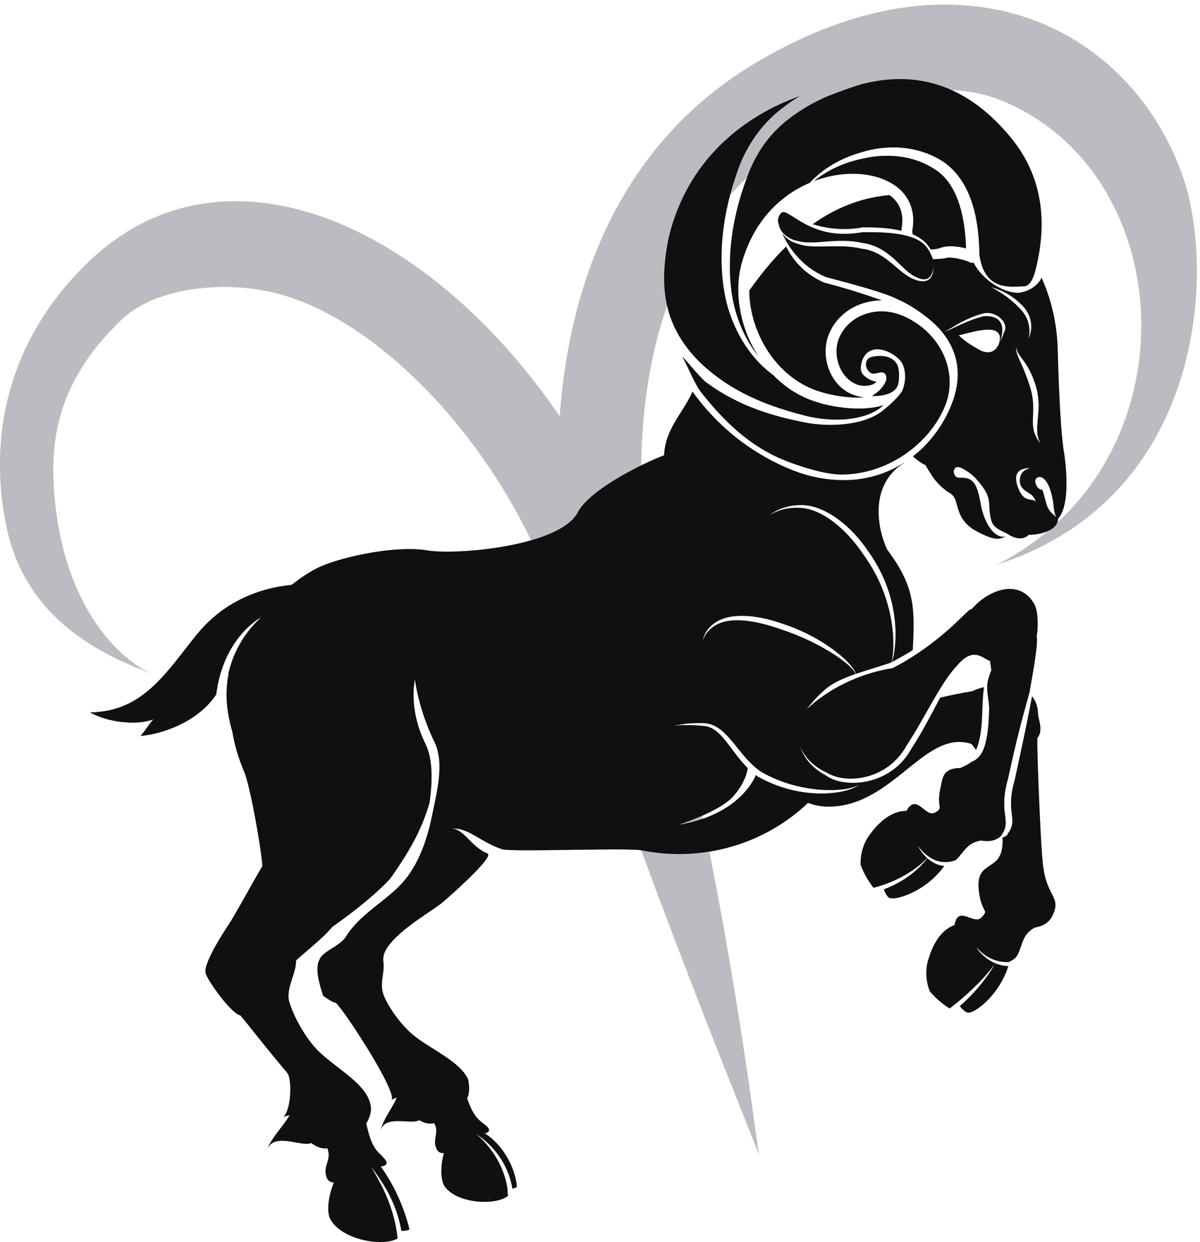 1200 160824317 Black Aries Astrology Sign 